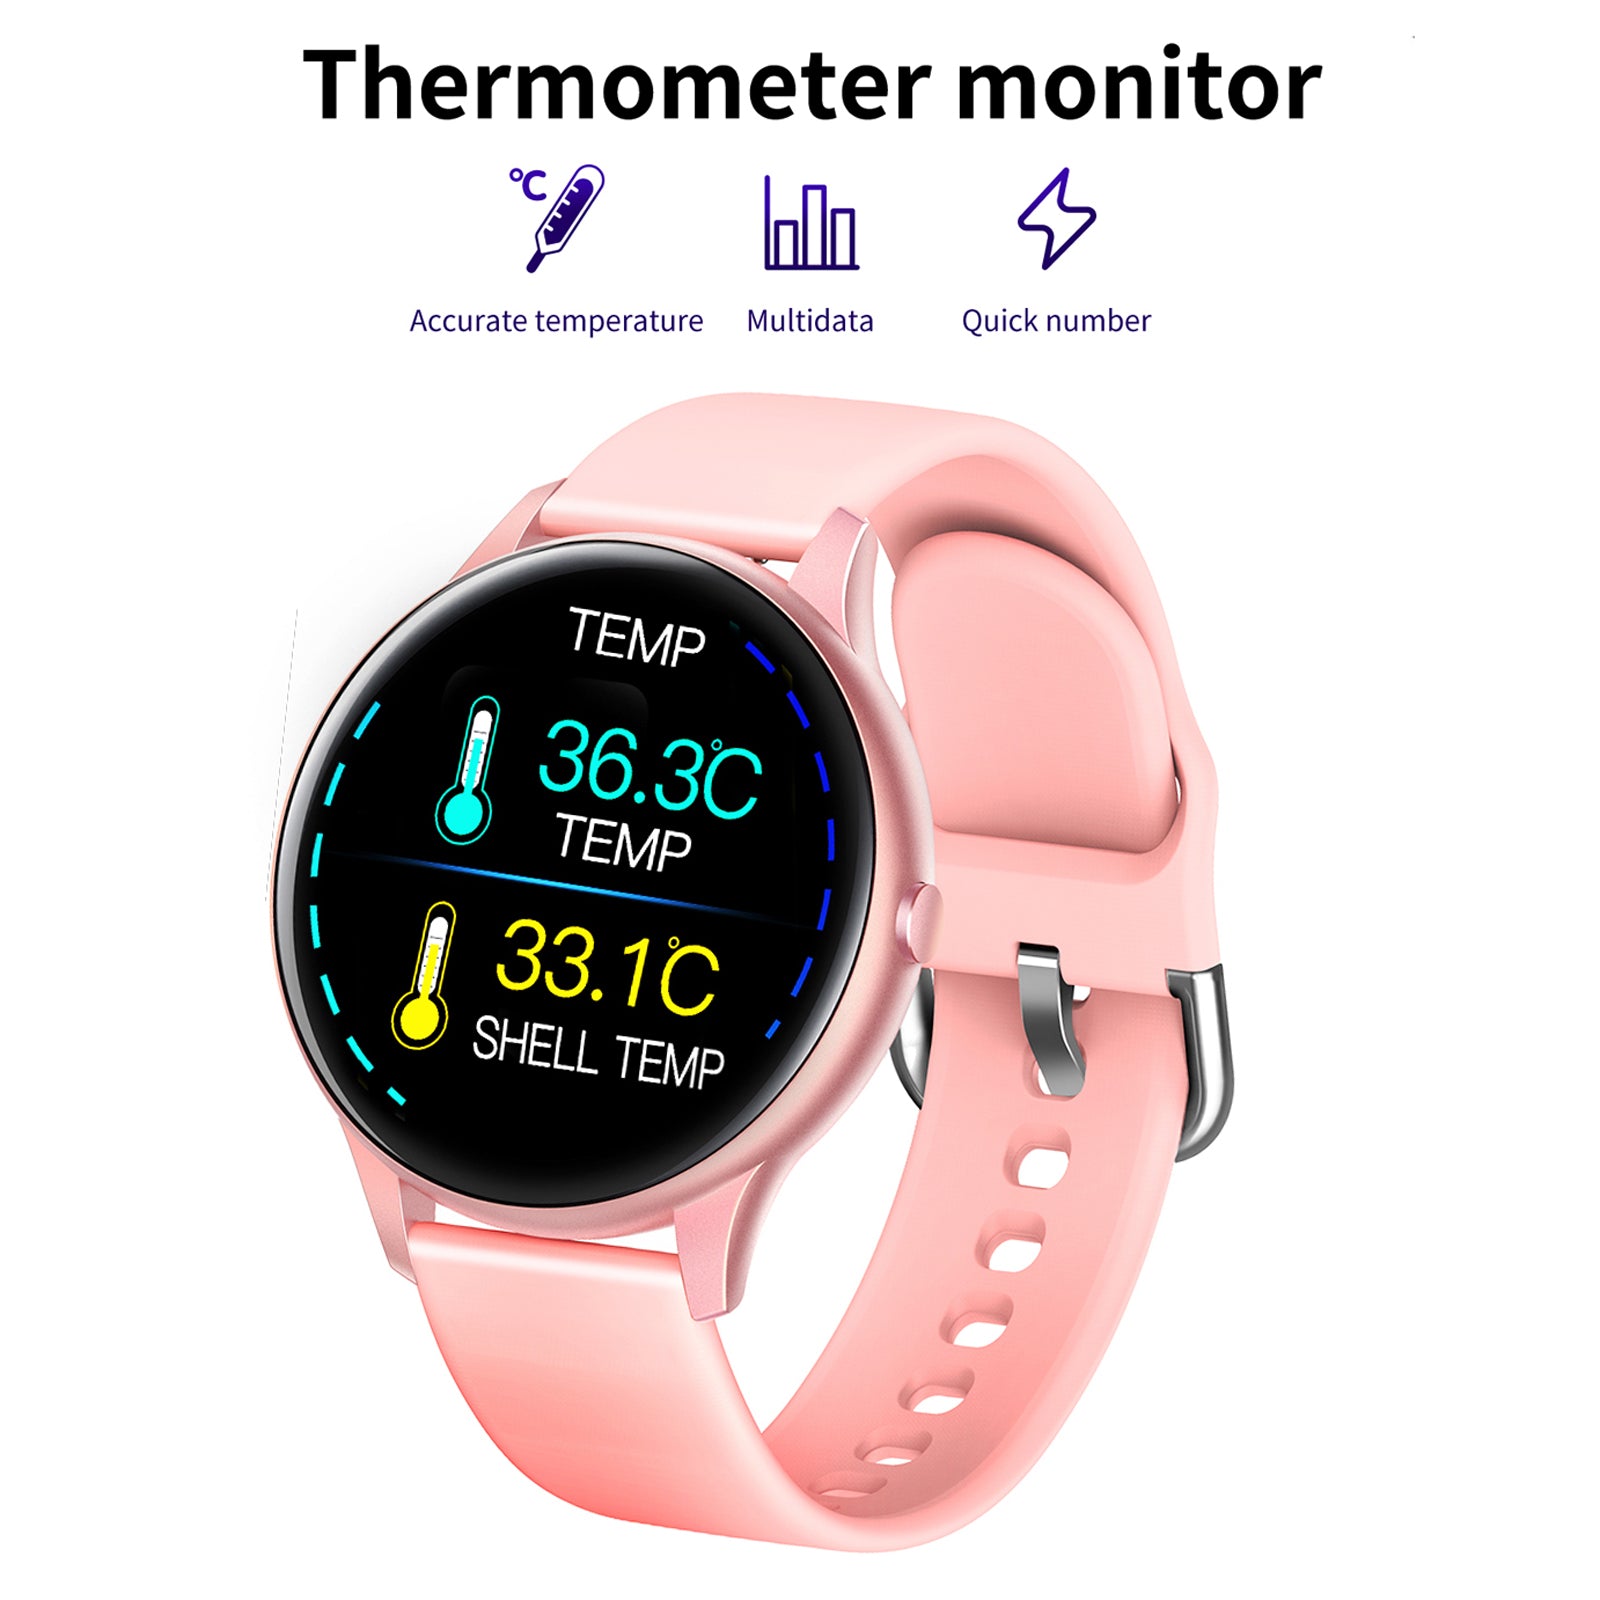 K21 Smart Watch Body Thermometer Fitness Tracker Bracelet Smart Sport Band Heart Rate Sleep Monitor Wristband Blood Pressure Test Color Screen IP67 Waterproof Message Push